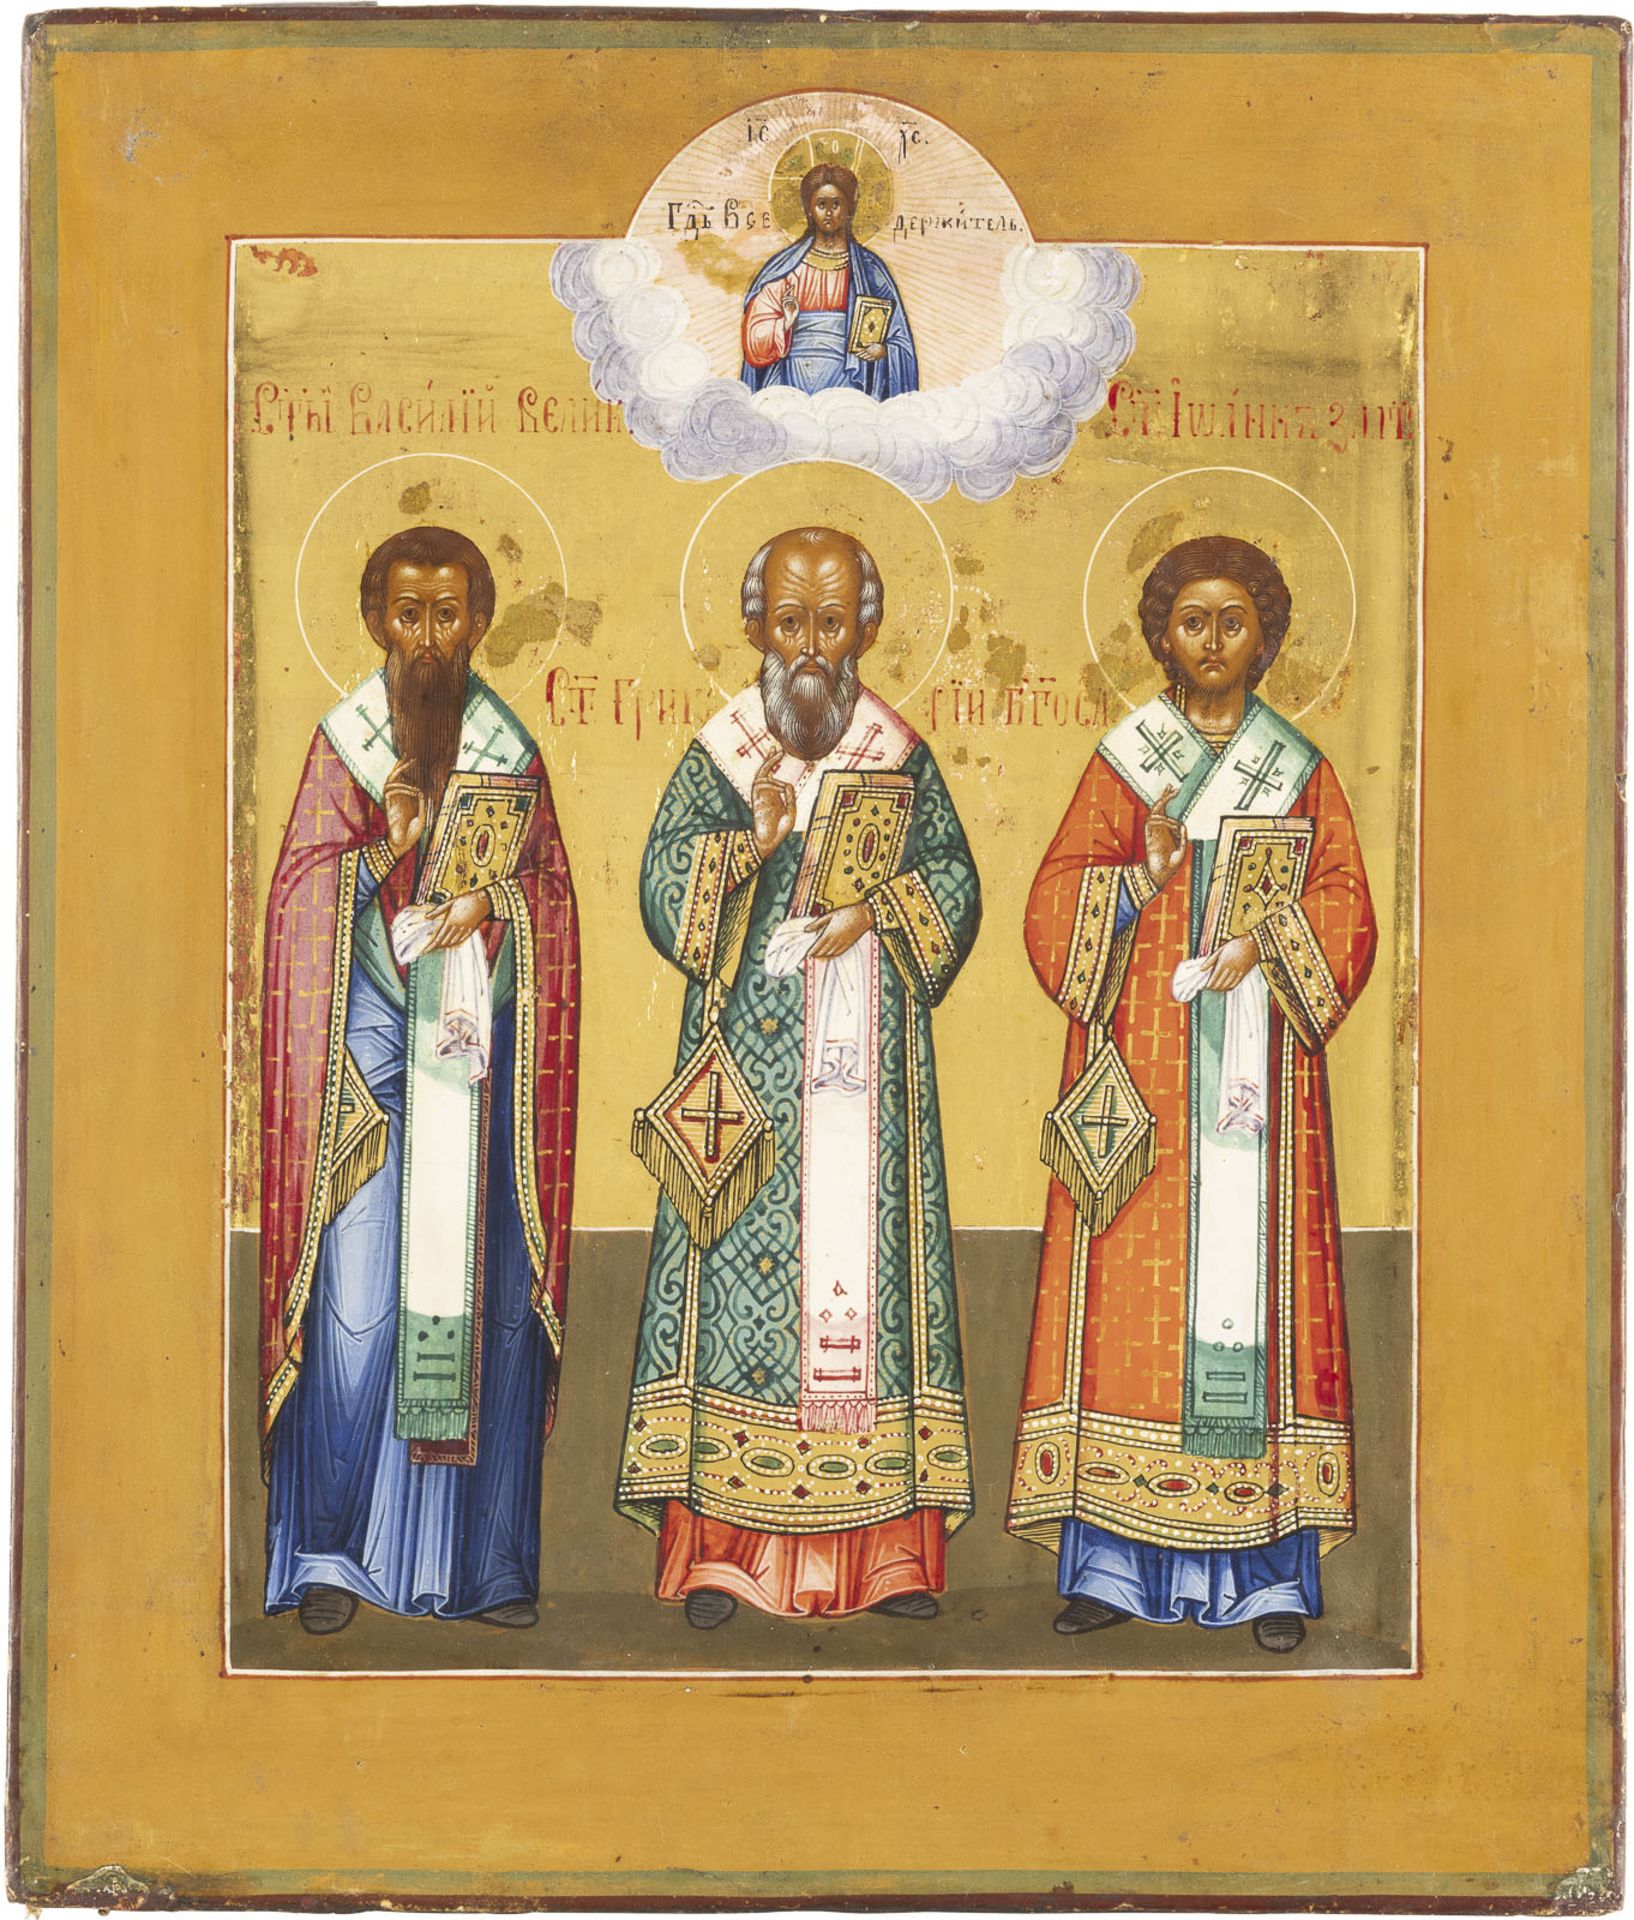 AN ICON SHOWING THE HIERARCHS OF ORTHODOXY BASIL THE GREAT, GREGORY THE GREAT AND JOHN CHRYSOSTOM